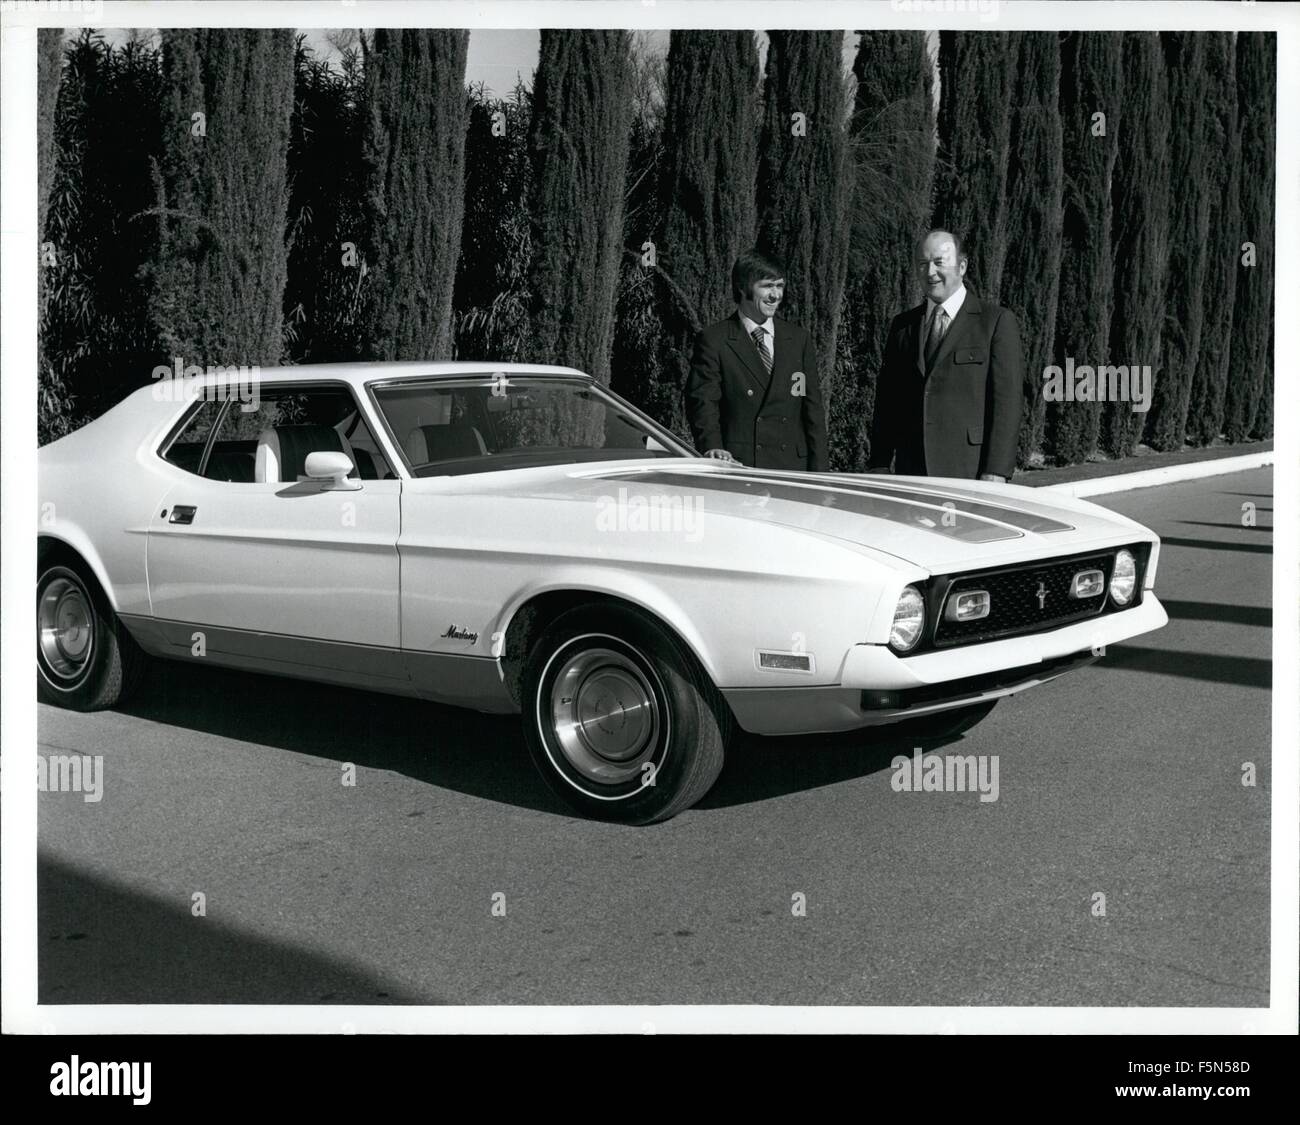 1972 - King Of The Pony Cars - The Ford Mustang, named ''Car of the ...